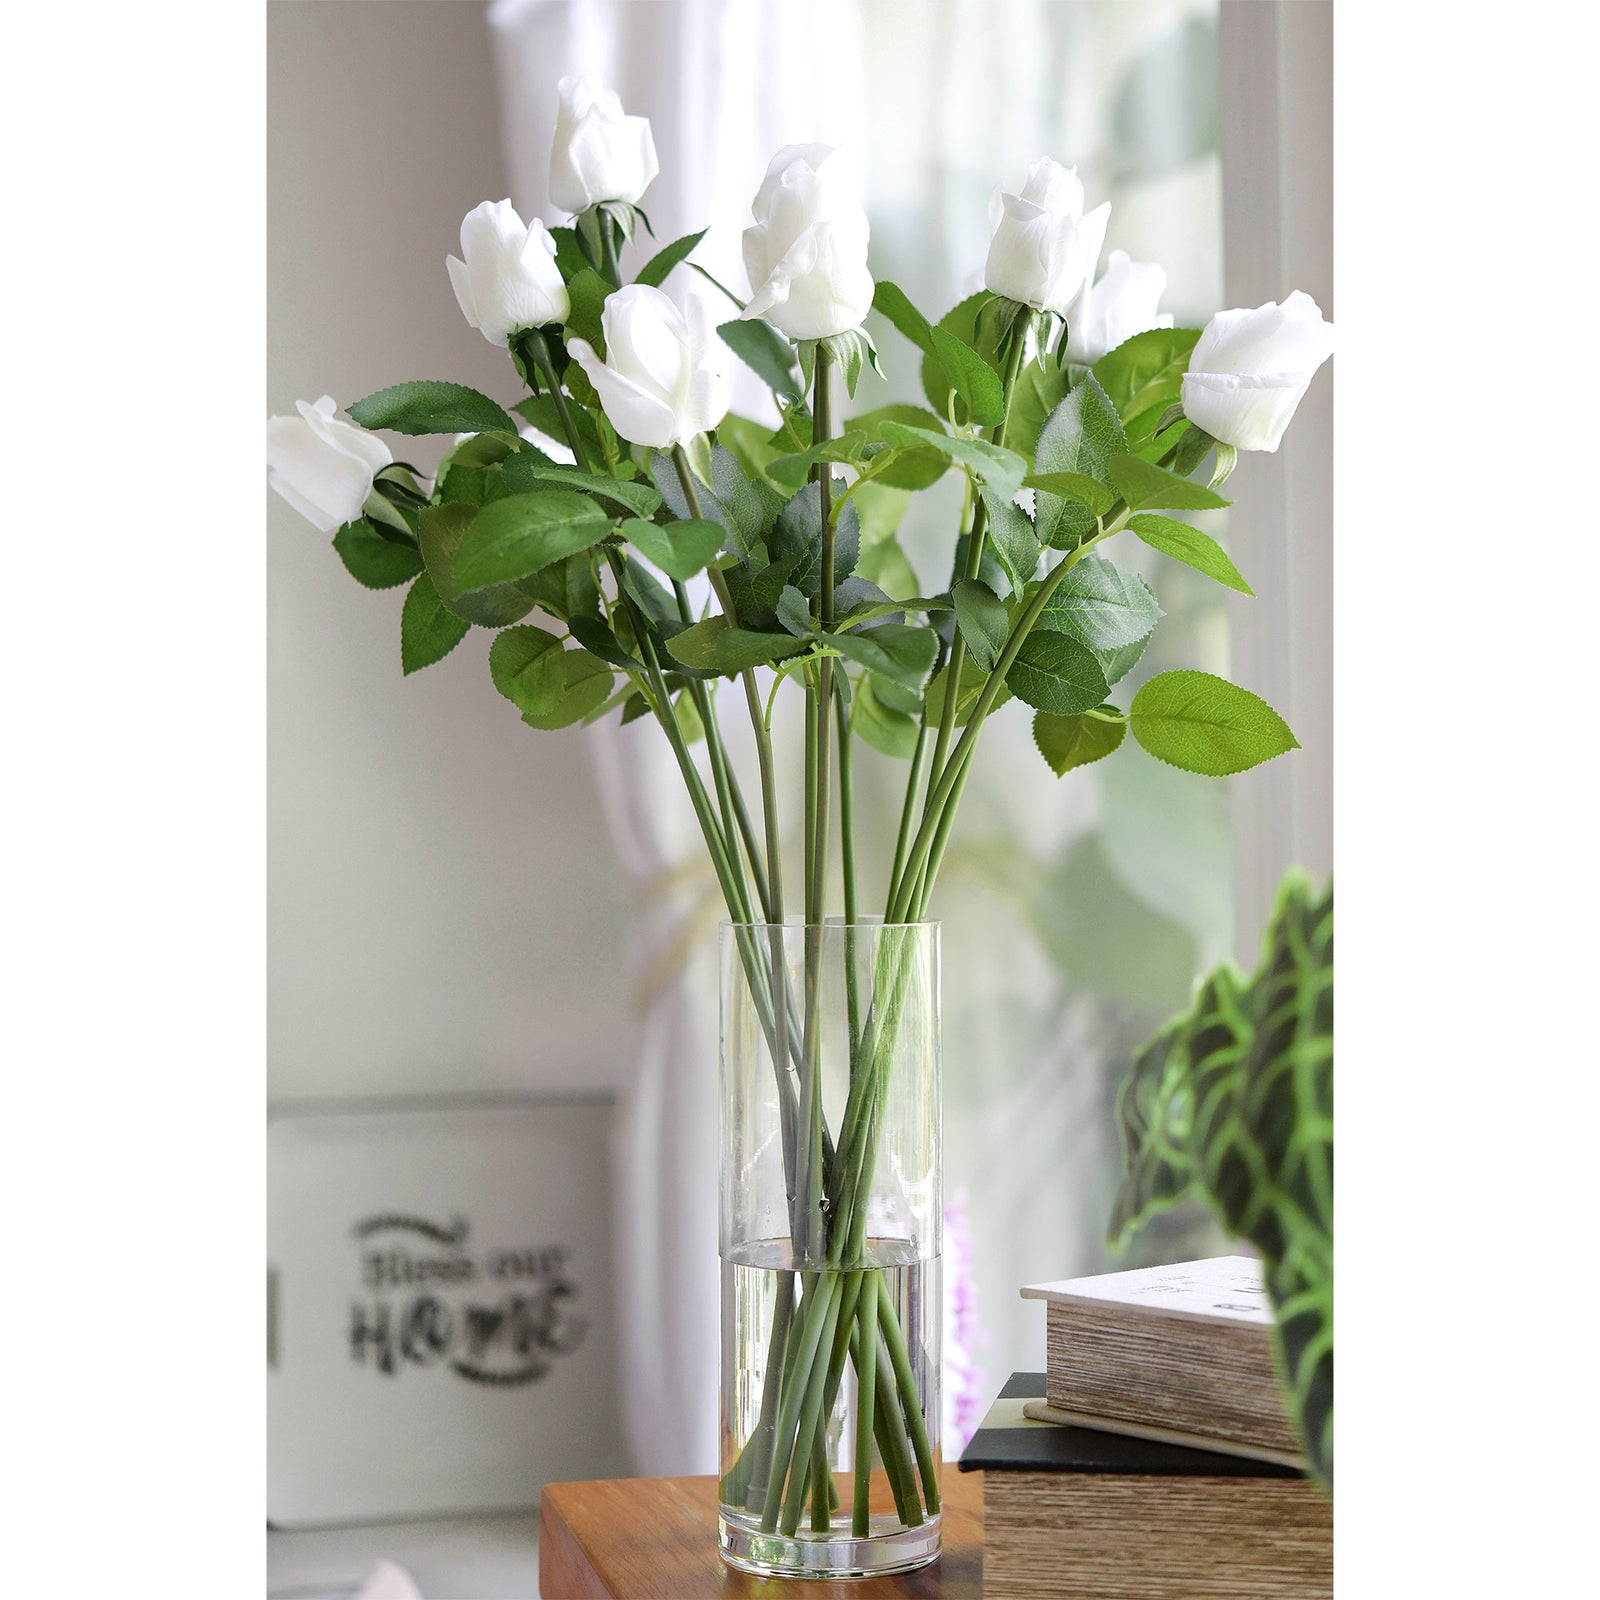 Classic White Long Stem 21 inches Roses Real Touch Silk Artificial Flowers 12 Stems